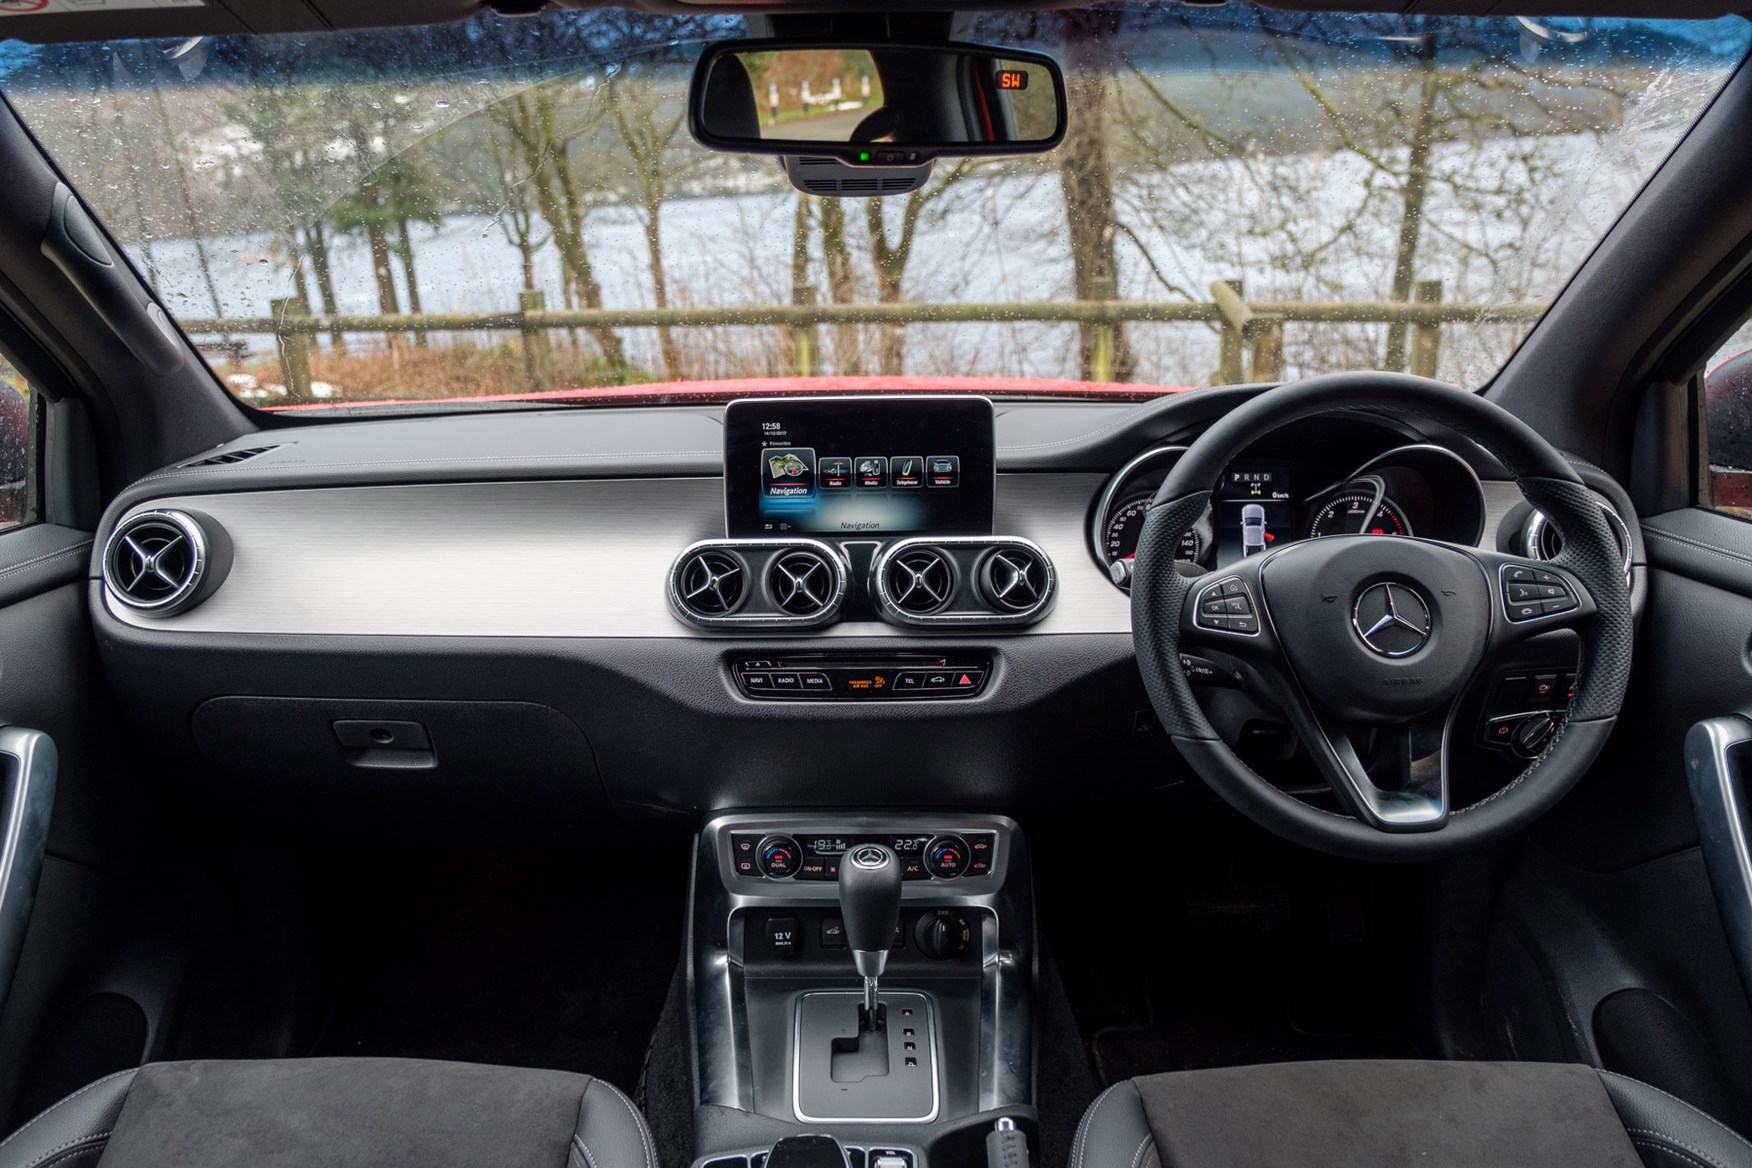 Mercedes-Benz X-Class full review on Parkers Vans - cabin